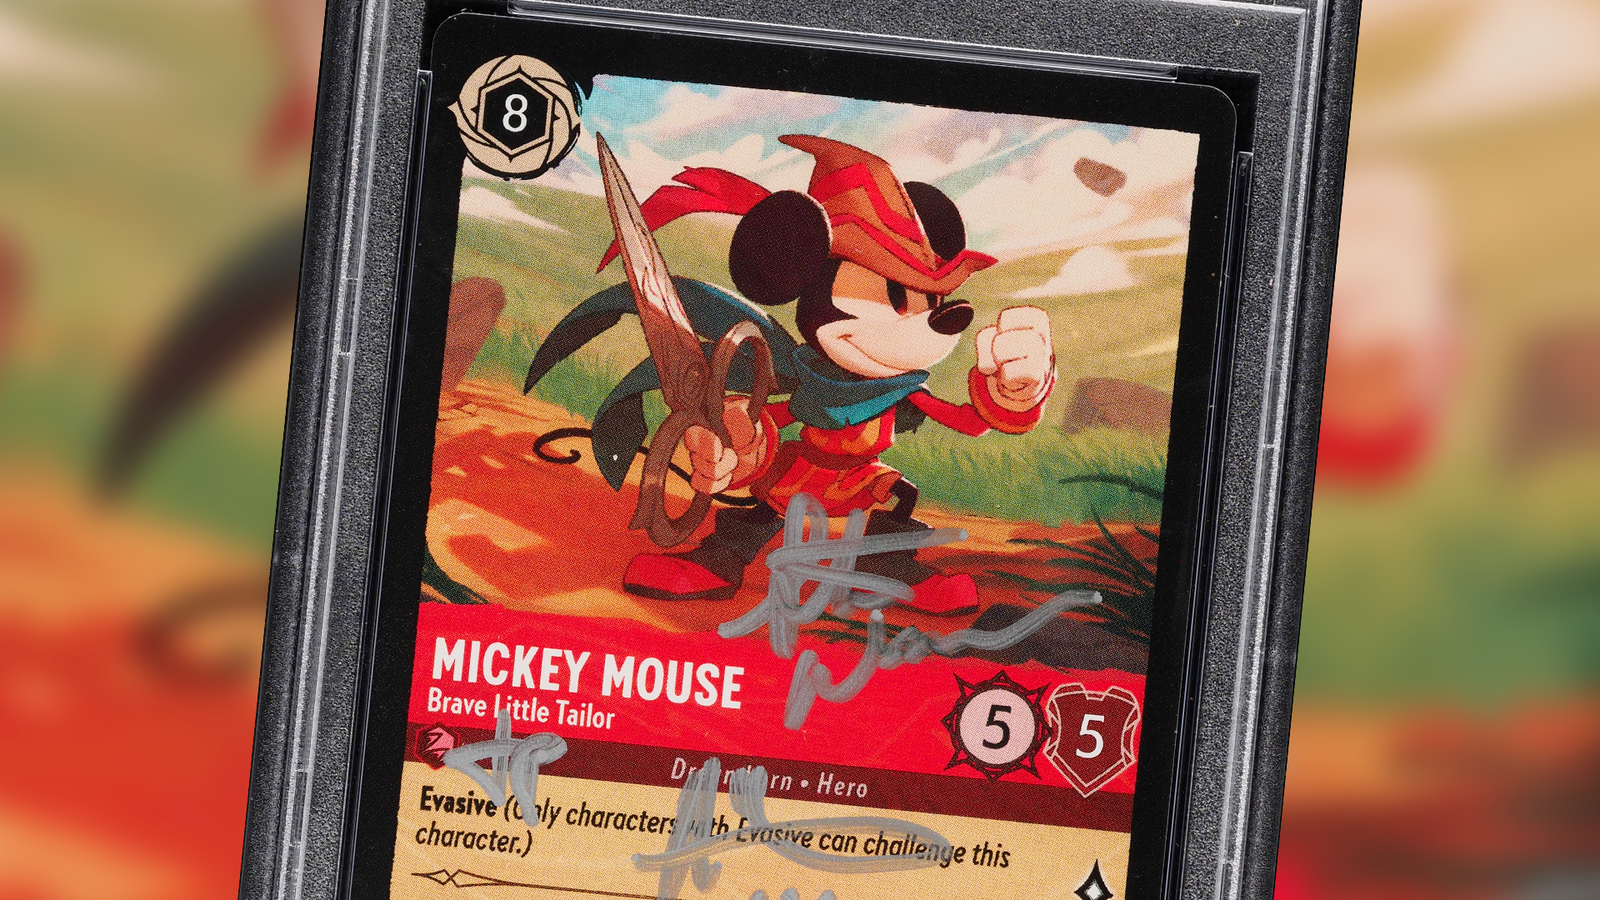 Disney Mickey Mouse Inspired Black and Gold Playing Cards by